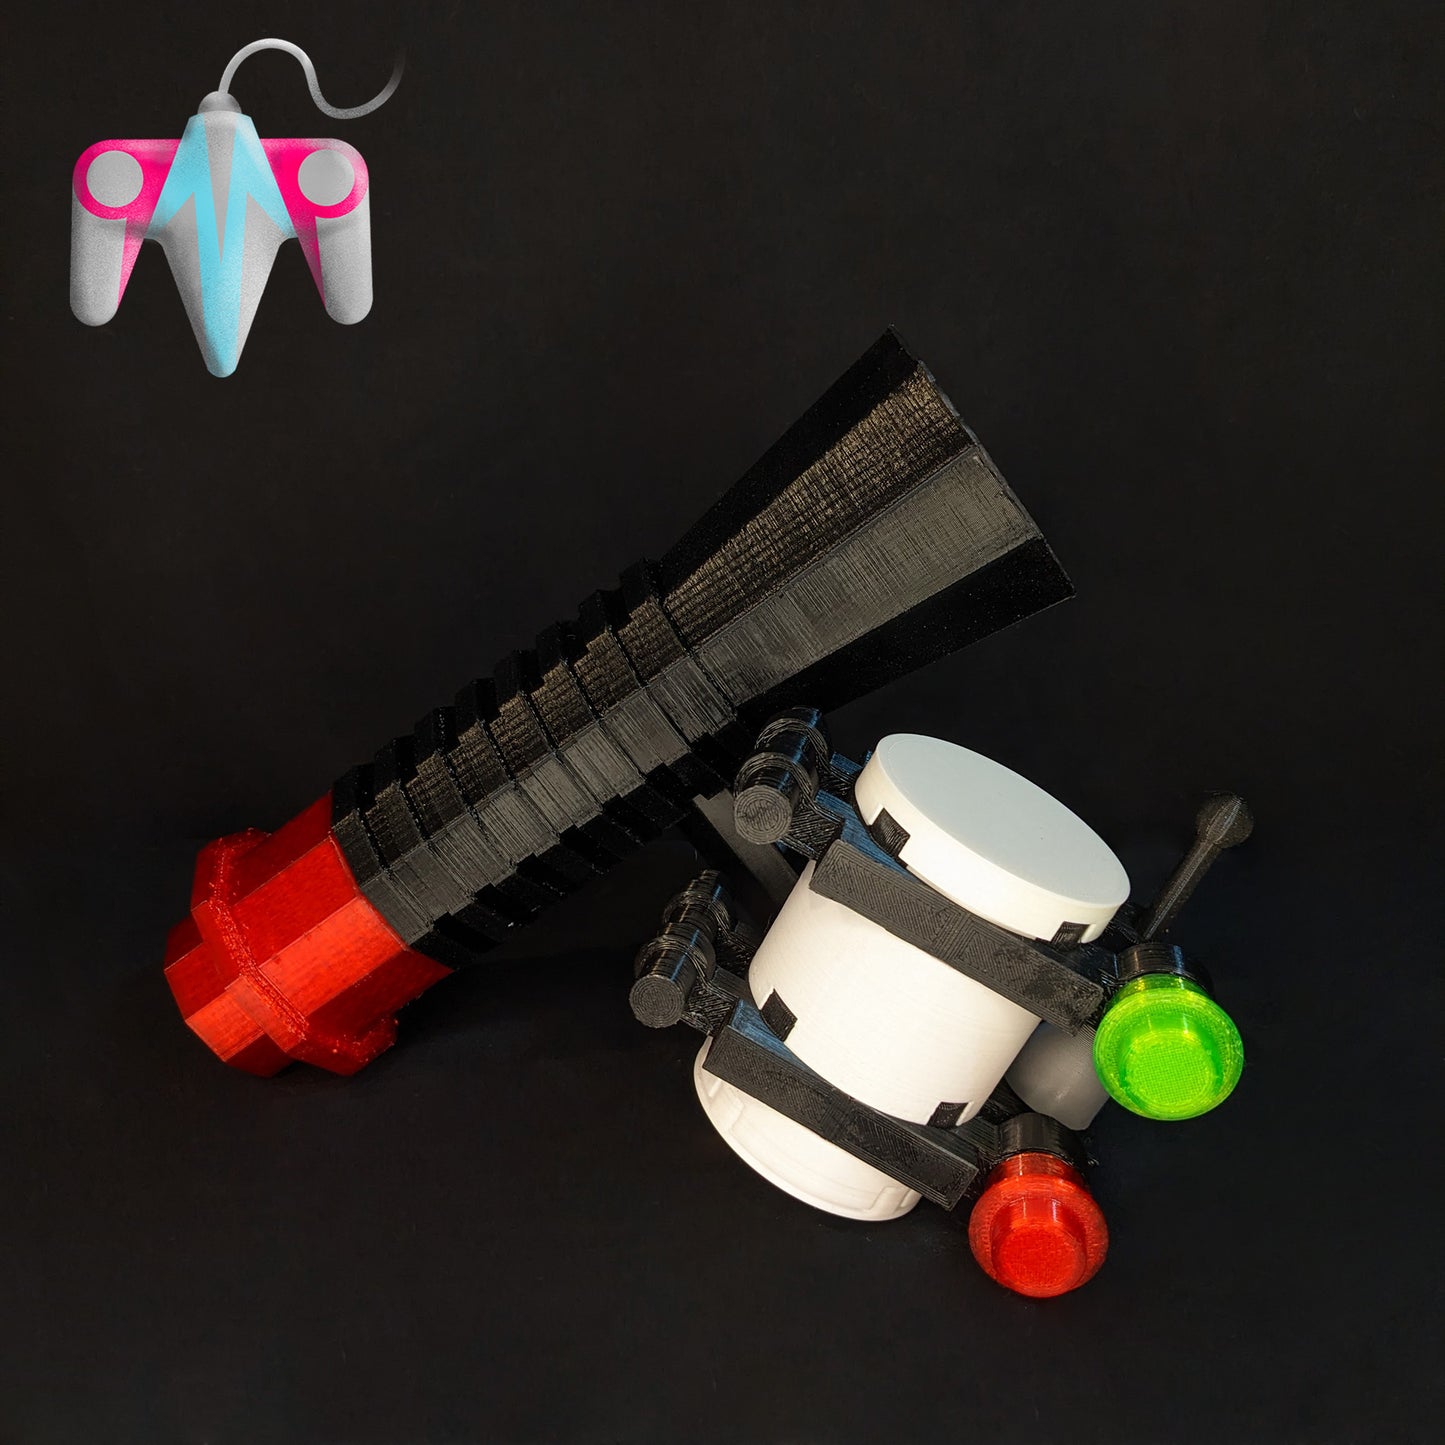 3D Printed Life Size LowPoly Megaphone Blaster (FREE SHIPPING)